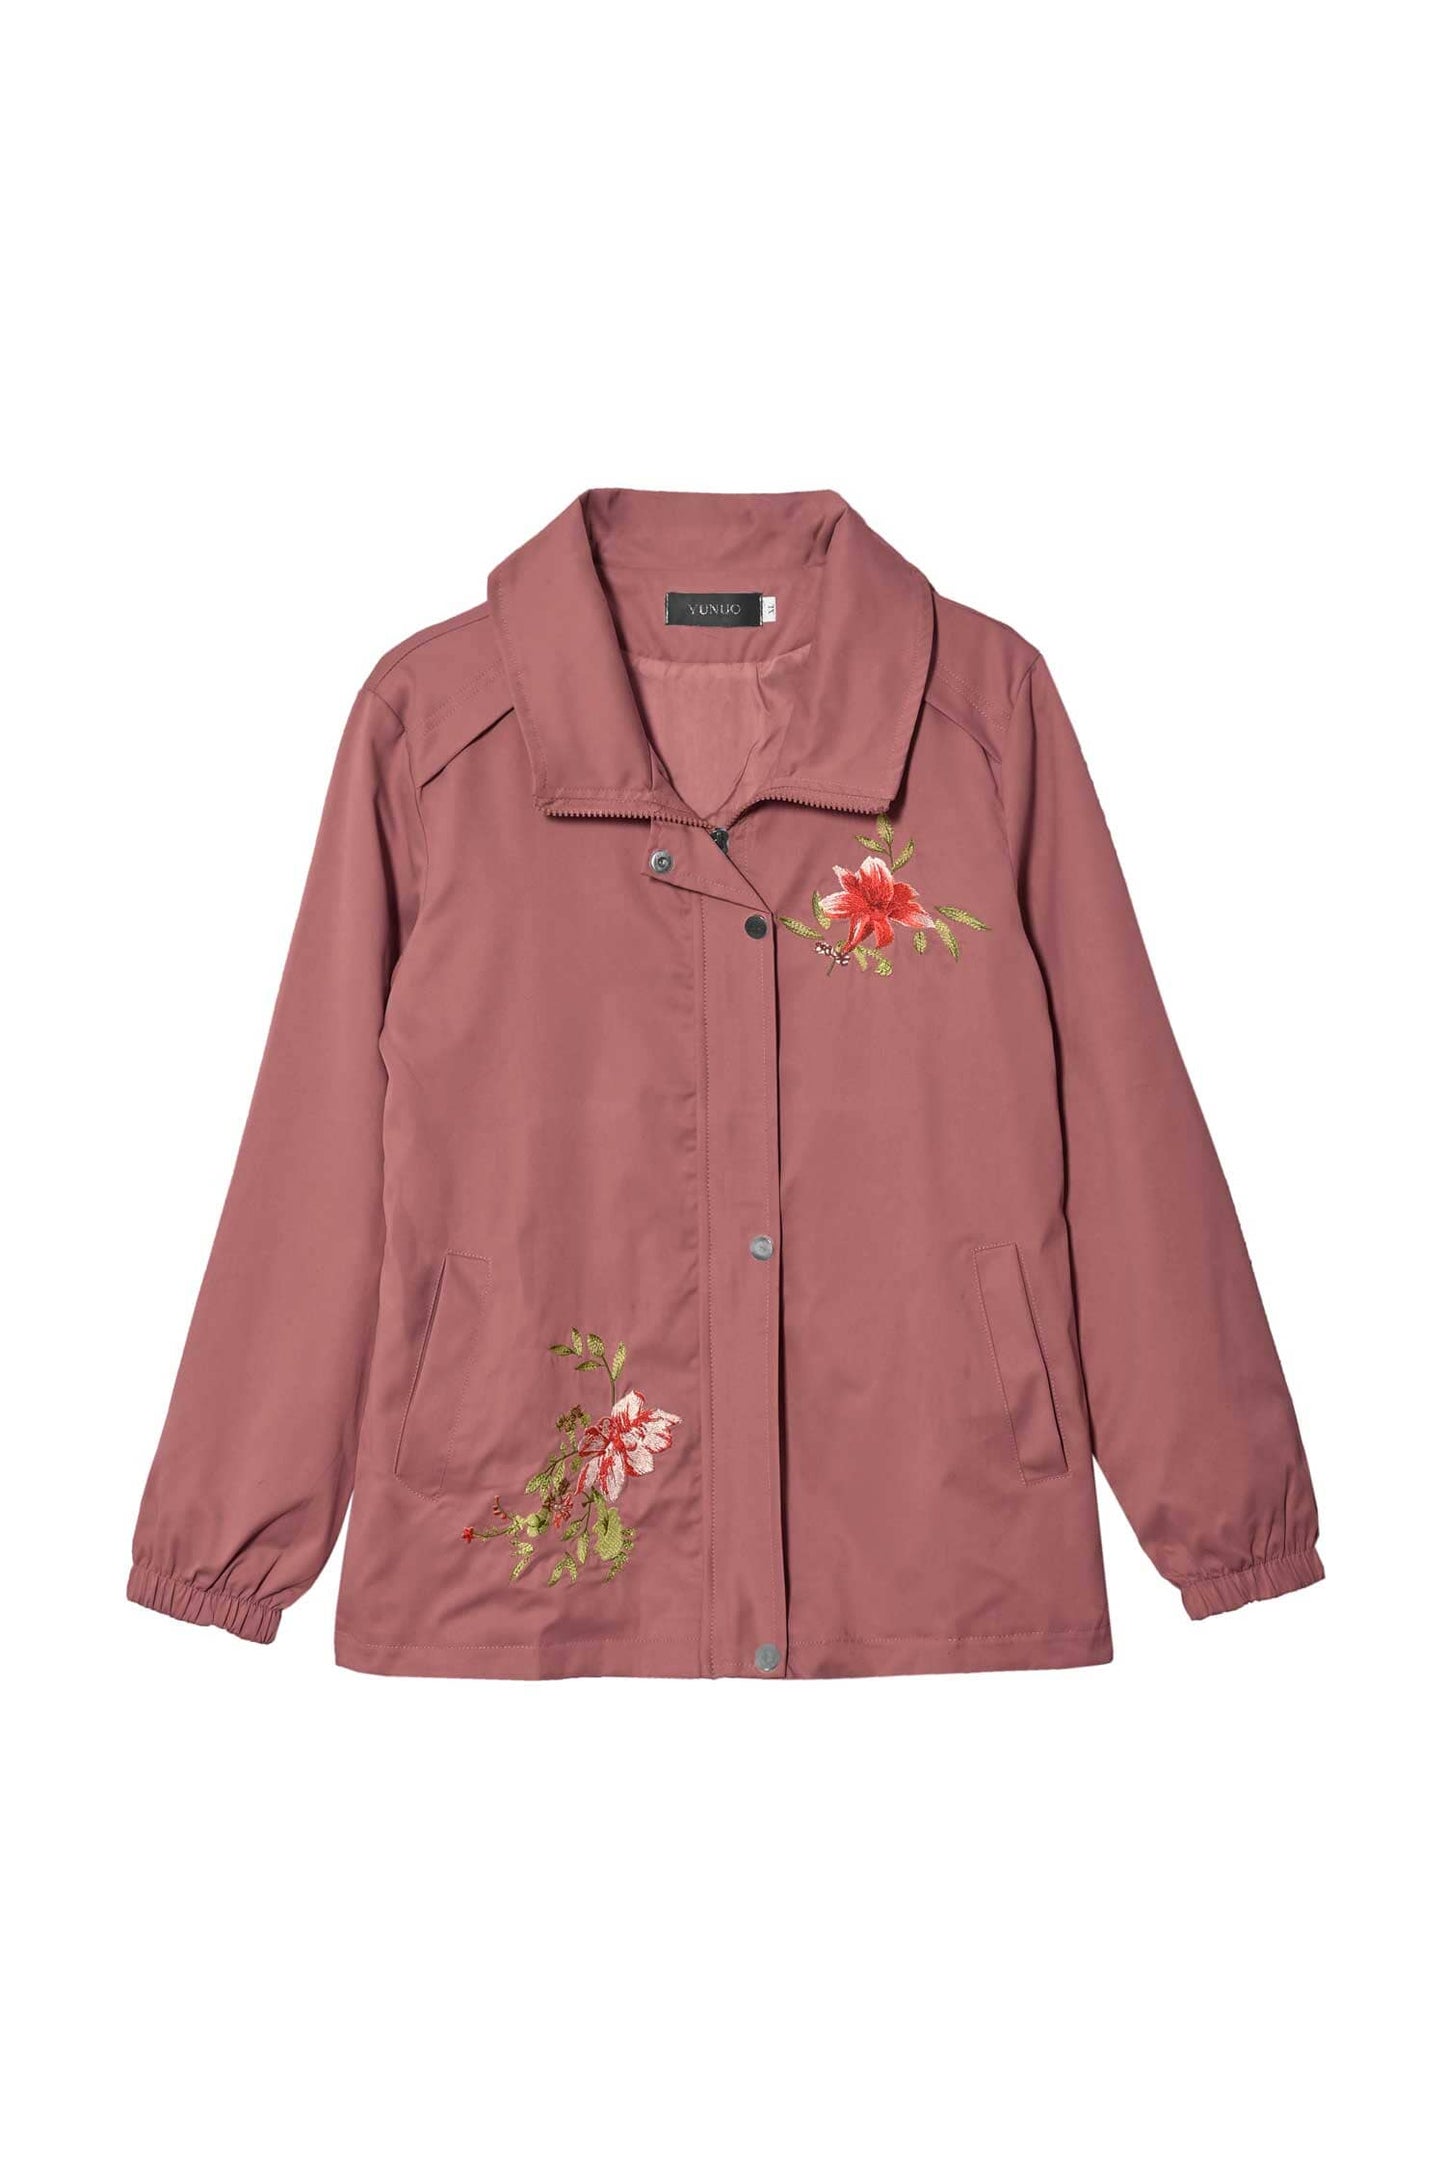 Yunuo Women's Floral Embroidered Zipper Jacket Women's Jacket First Choice 